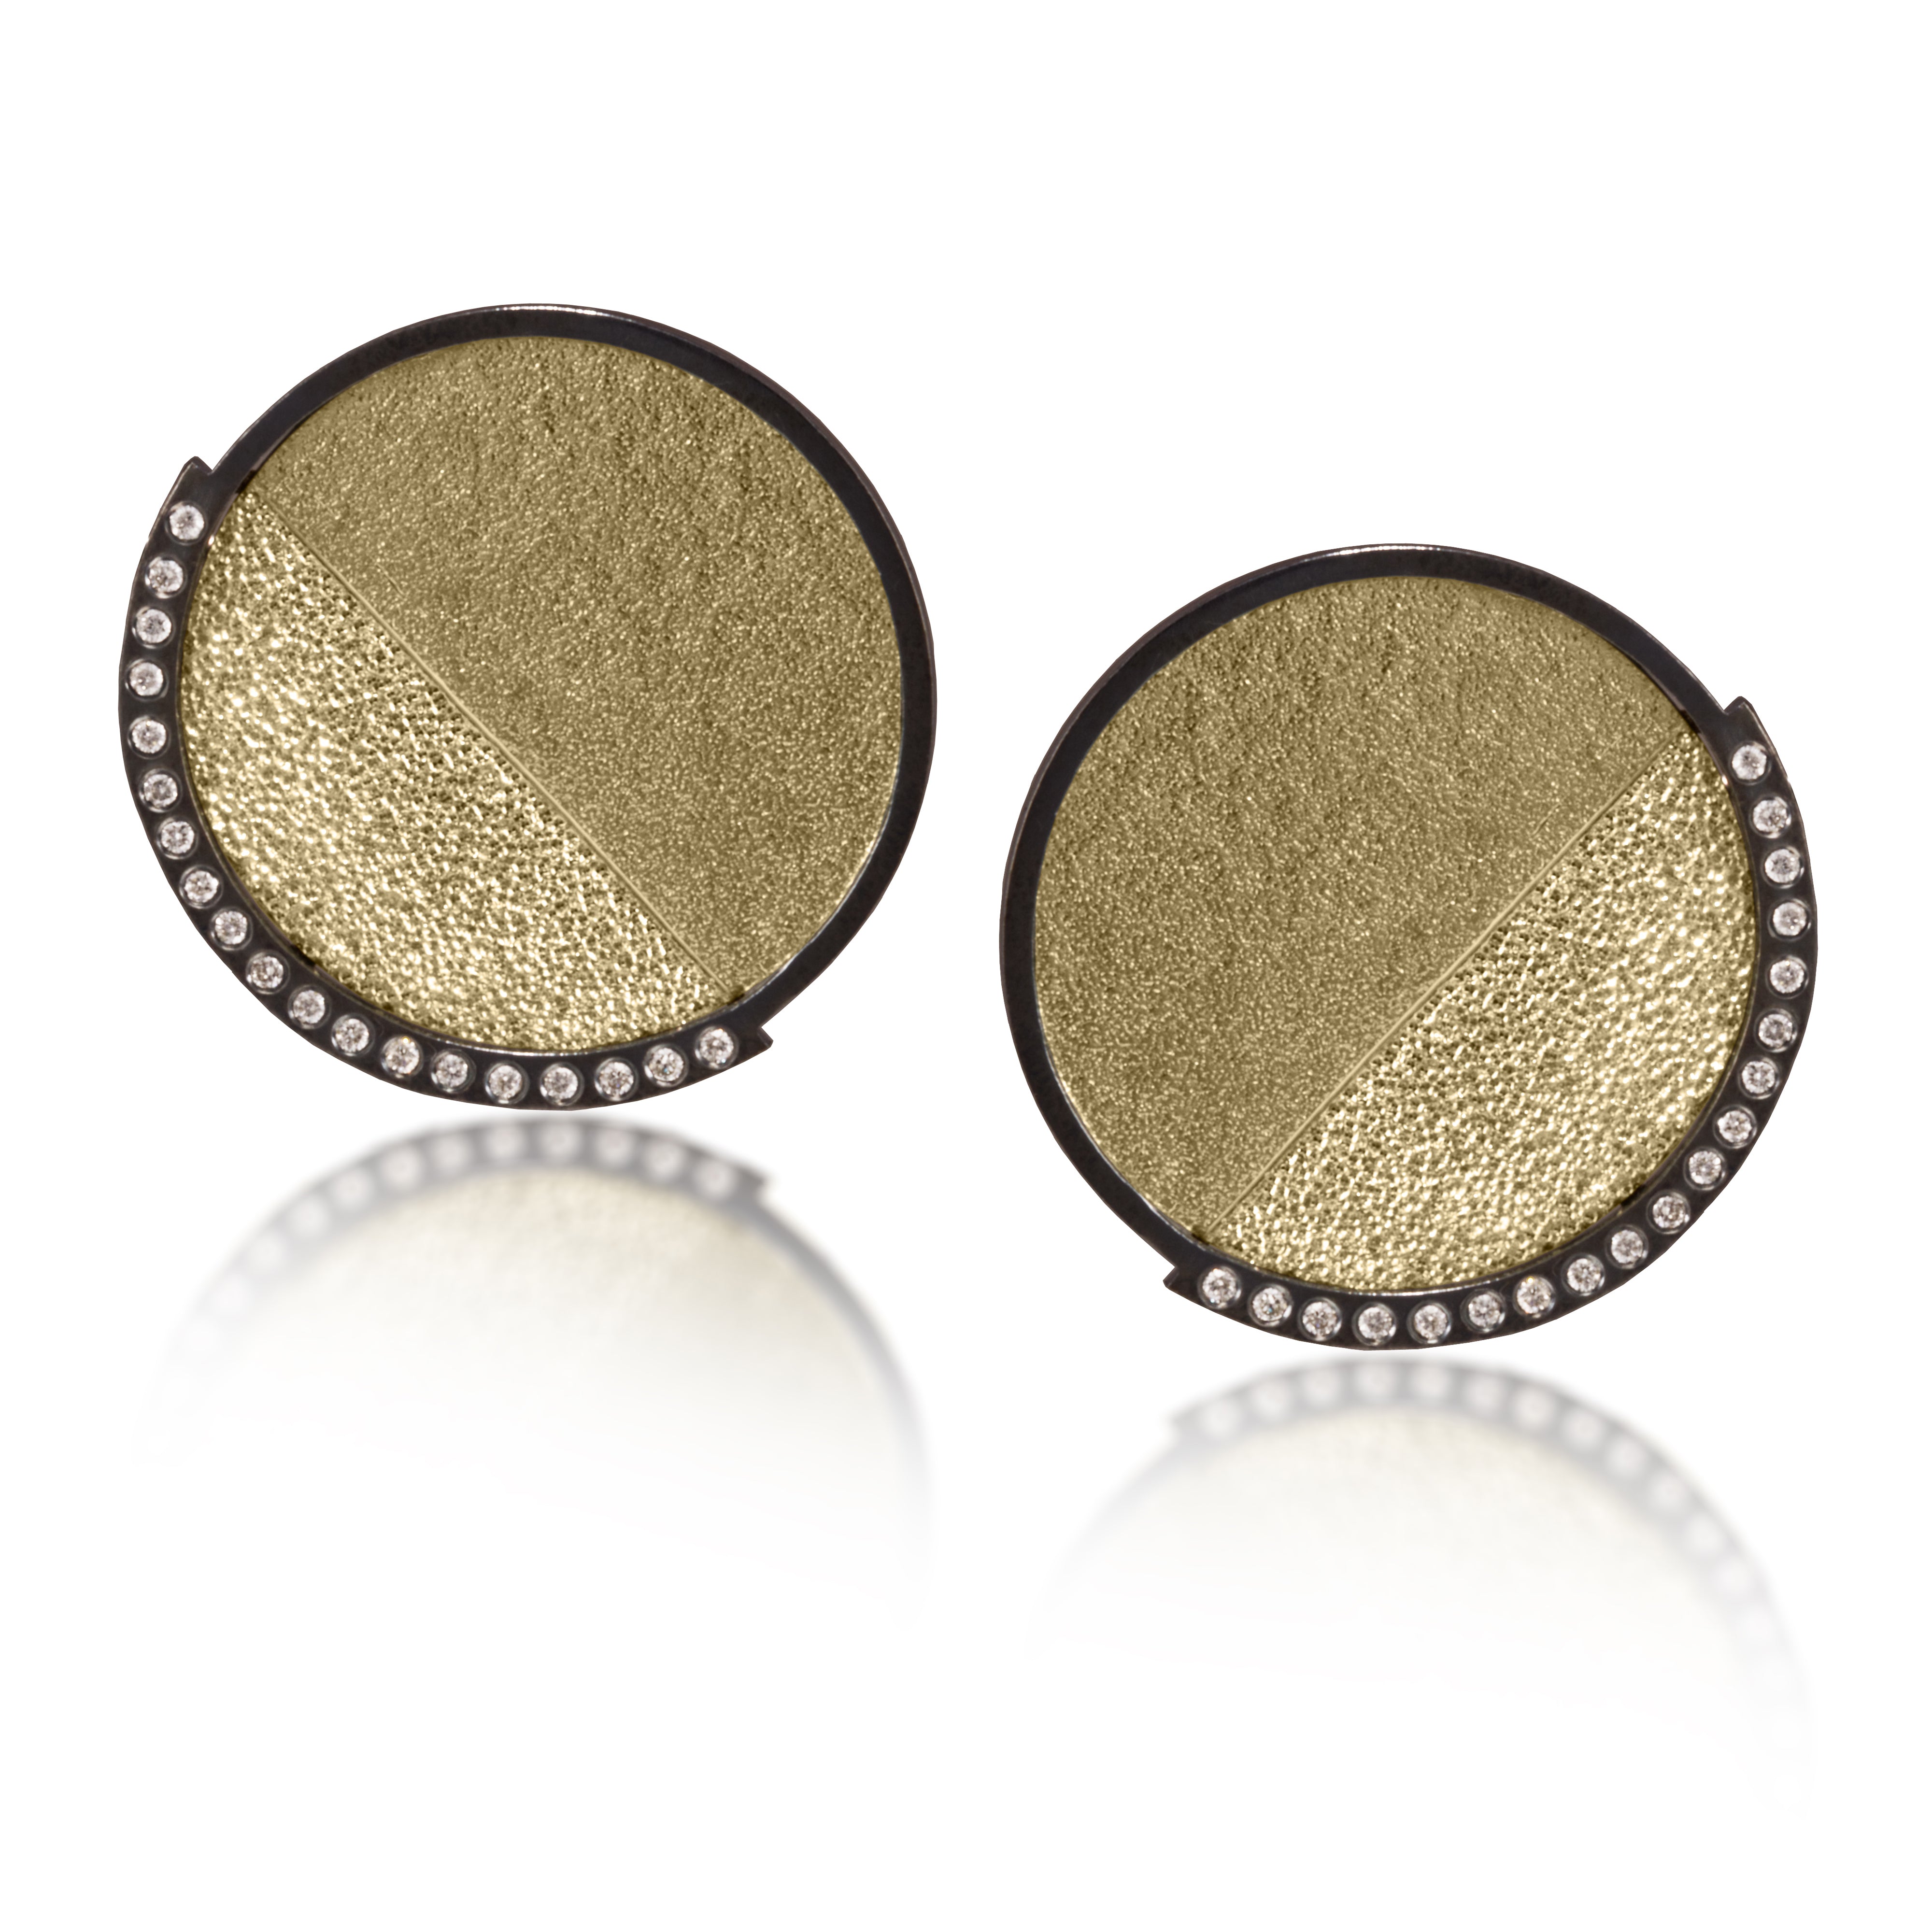 This post earring in oxidized sterling silver and richly textured 18k bimetal, is flush set with ideal cut white diamonds. It features 14k gold posts. Accent facet glitters with the texture of diamond facets, individually scored and textured.  Medium size 0.254 tcw, small size 0.147 tcw.